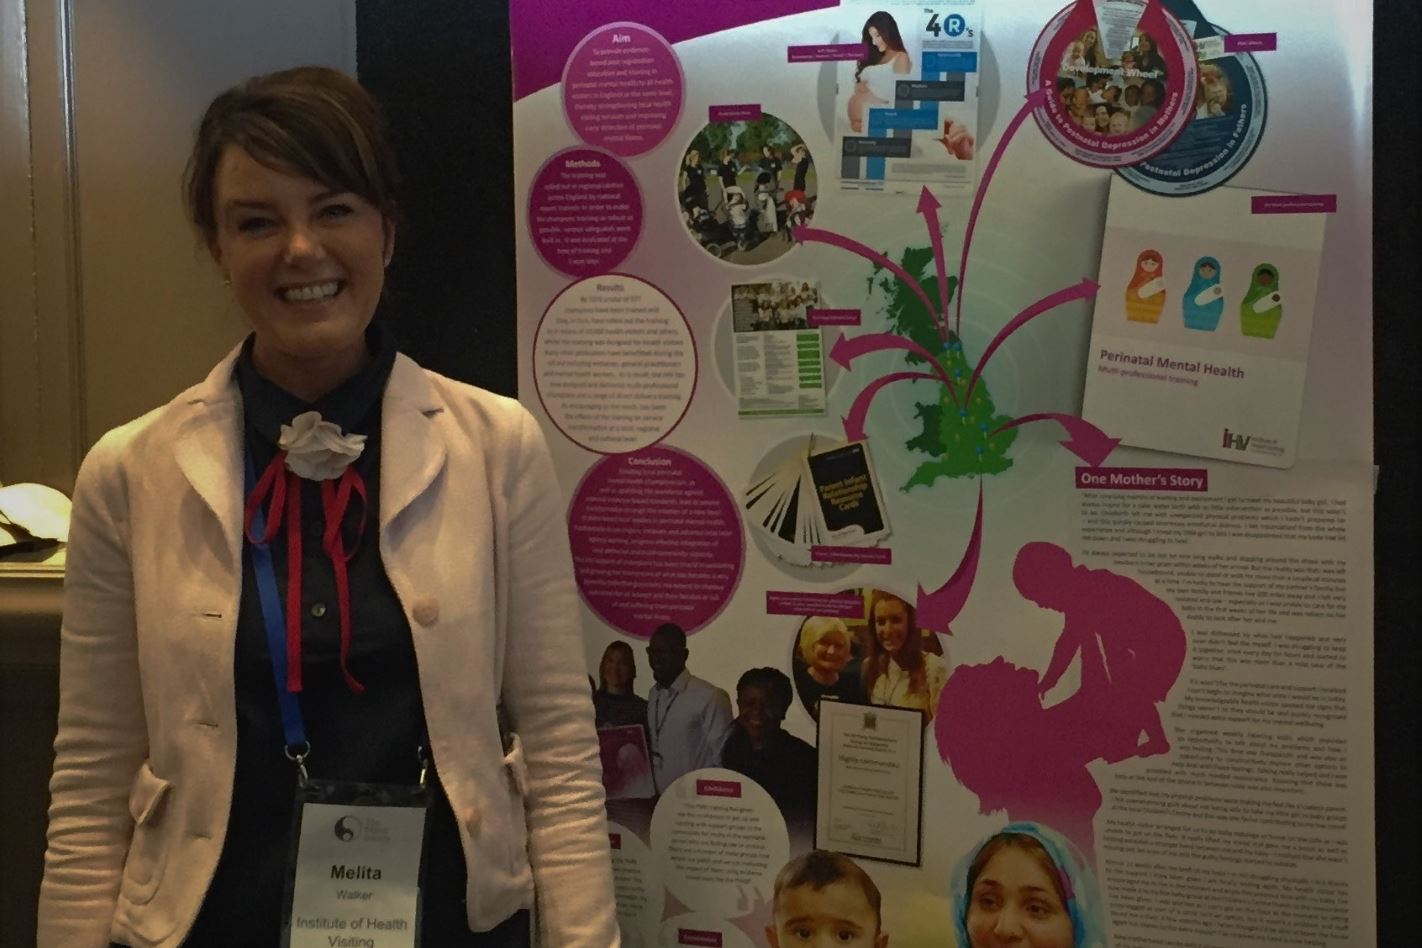 Melita Walker, Professional Development Officer/ Perinatal Mental Health Lead at the Institute of Health Visiting, presenting her poster at the International Marcé Society Biennial Scientific Meeting in Melbourne, Australia.